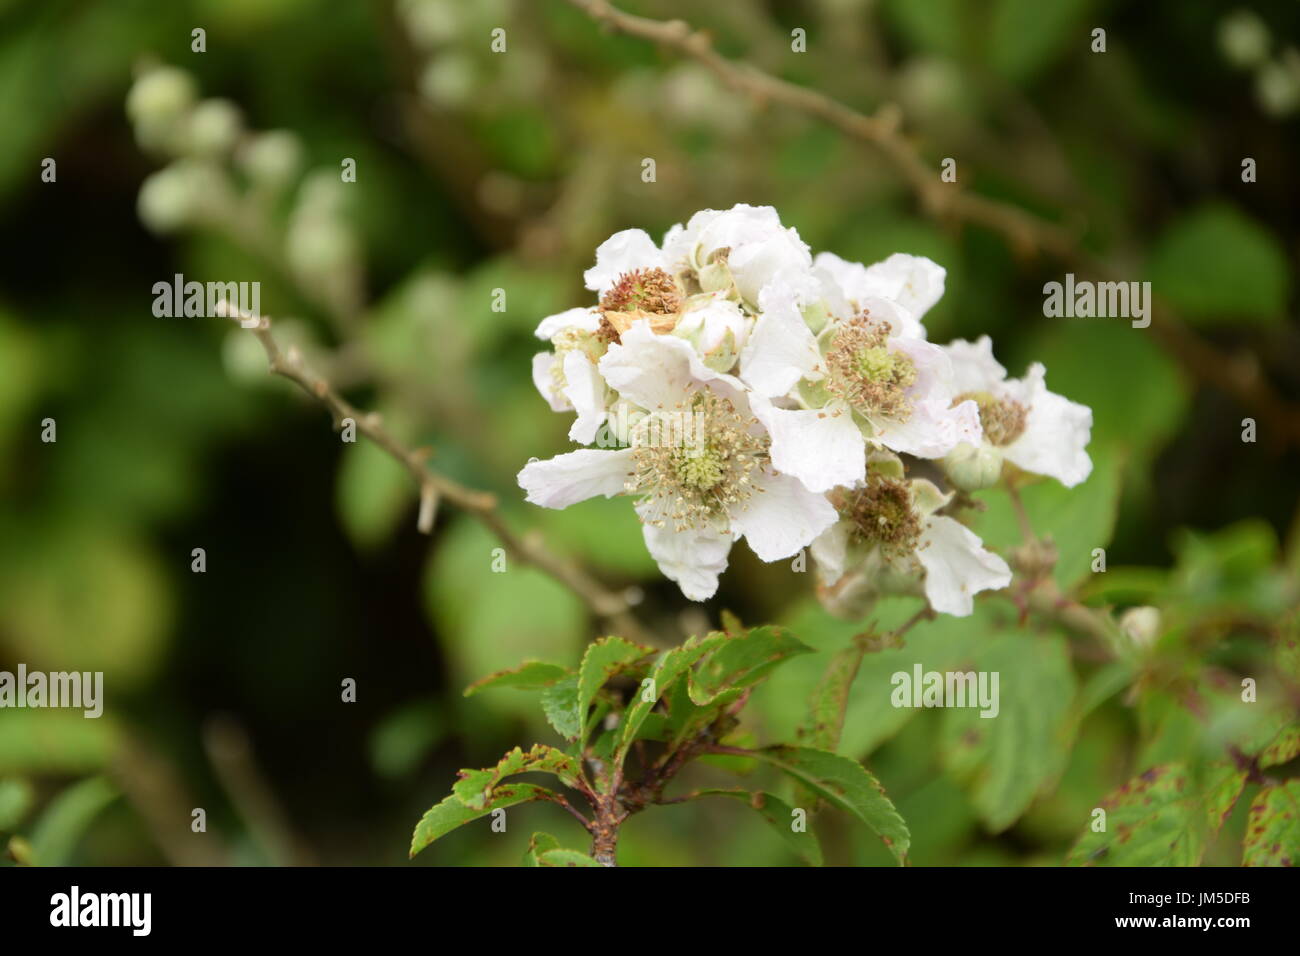 Blackberry flowers on the bush with green leaves in Ireland Stock Photo